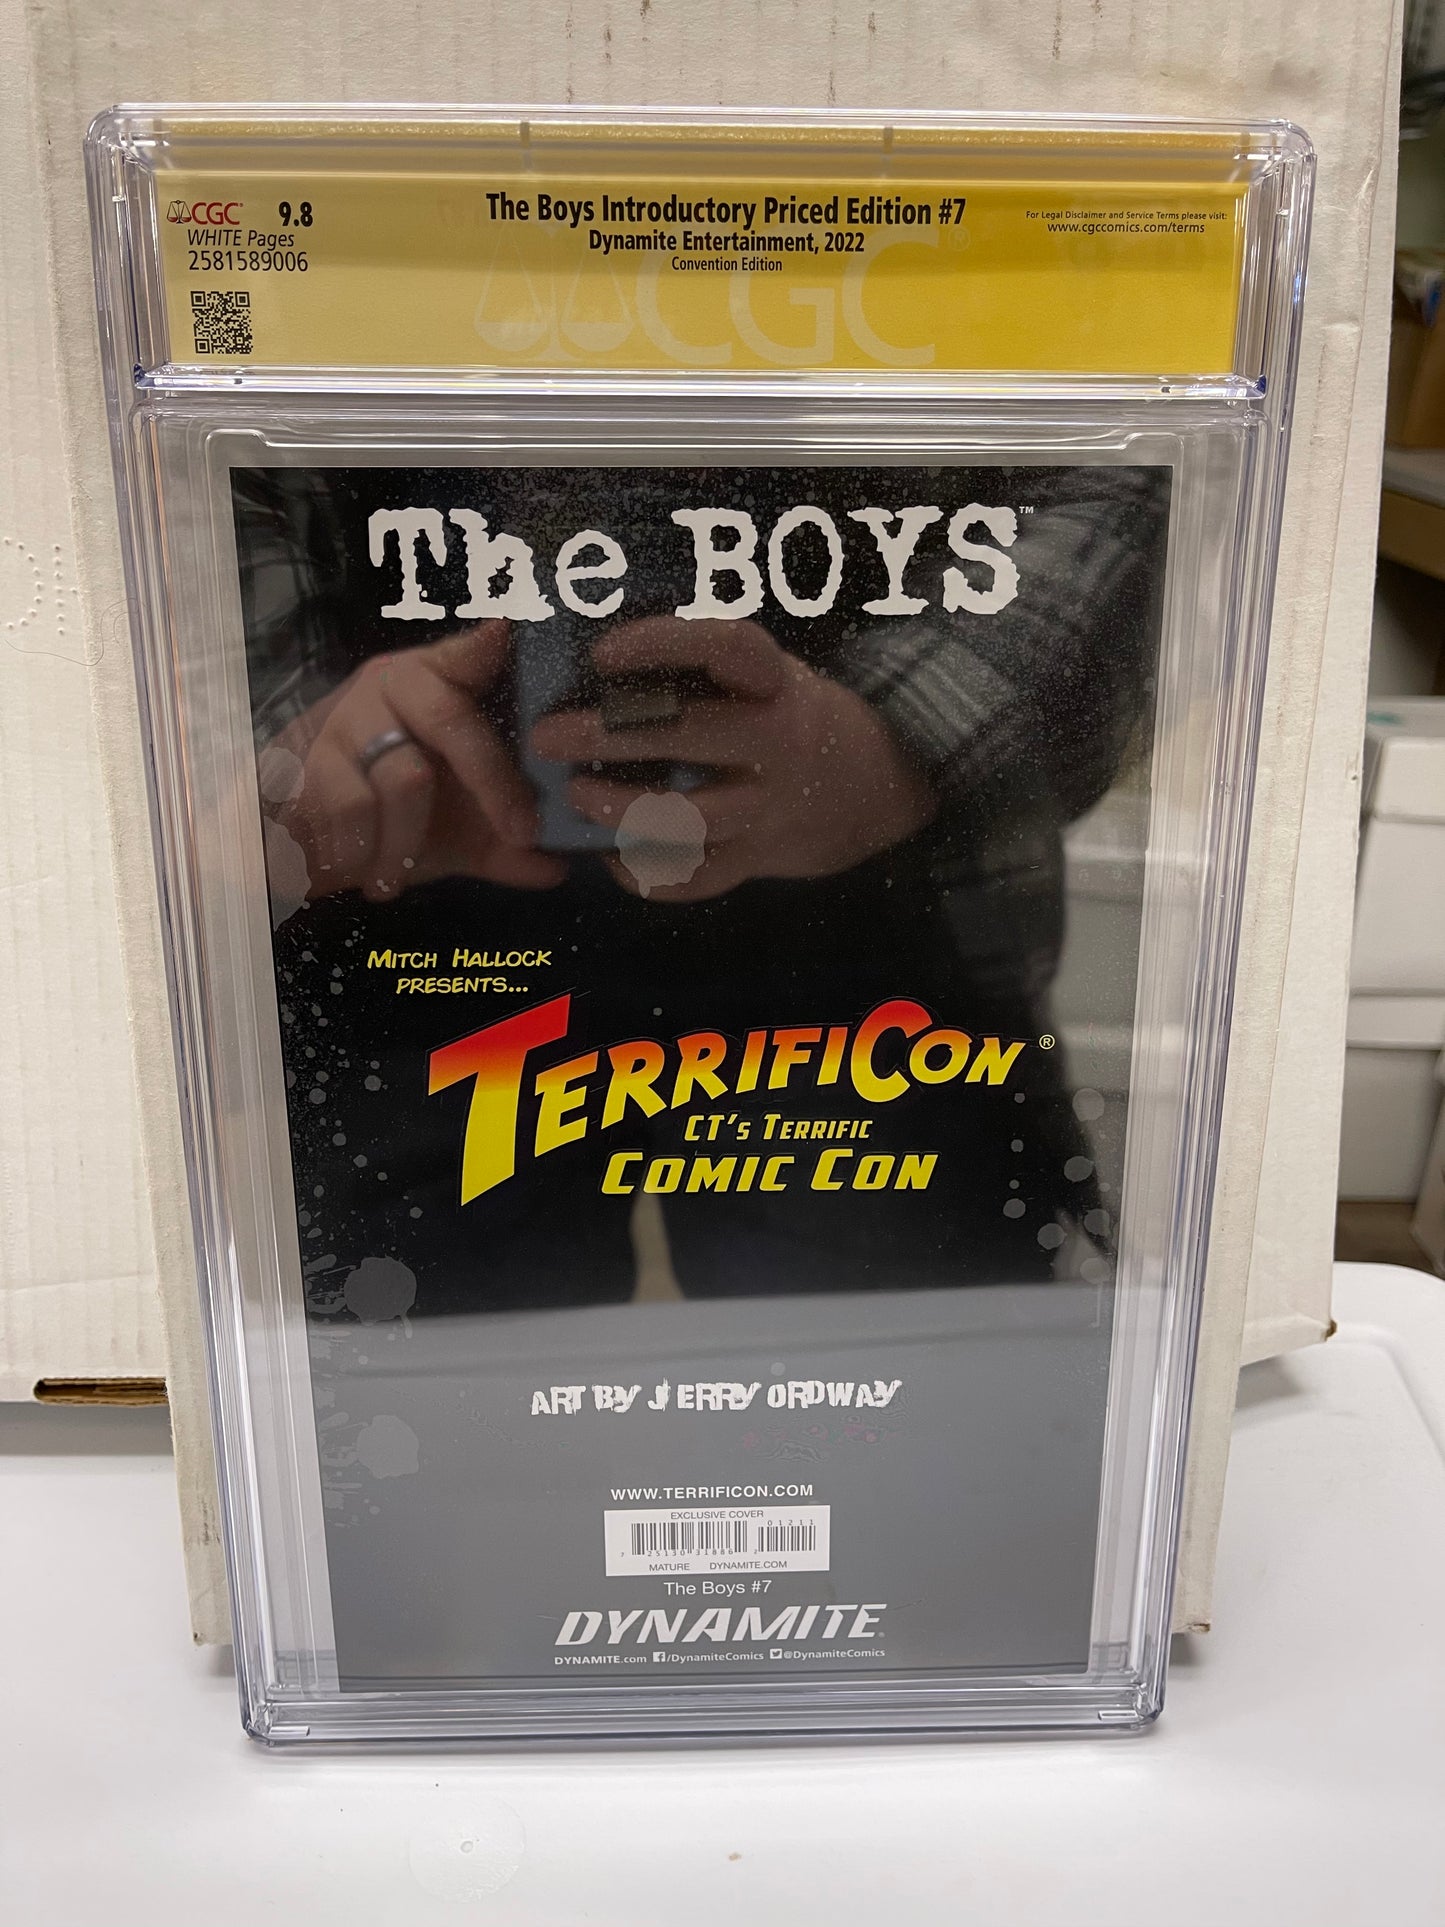 The Boys Indrotuctory Priced Edition #7 Terrificon Exclusive Variant CGC Signature Series - 9.8 (Signed by Jerry Conway/Garth En